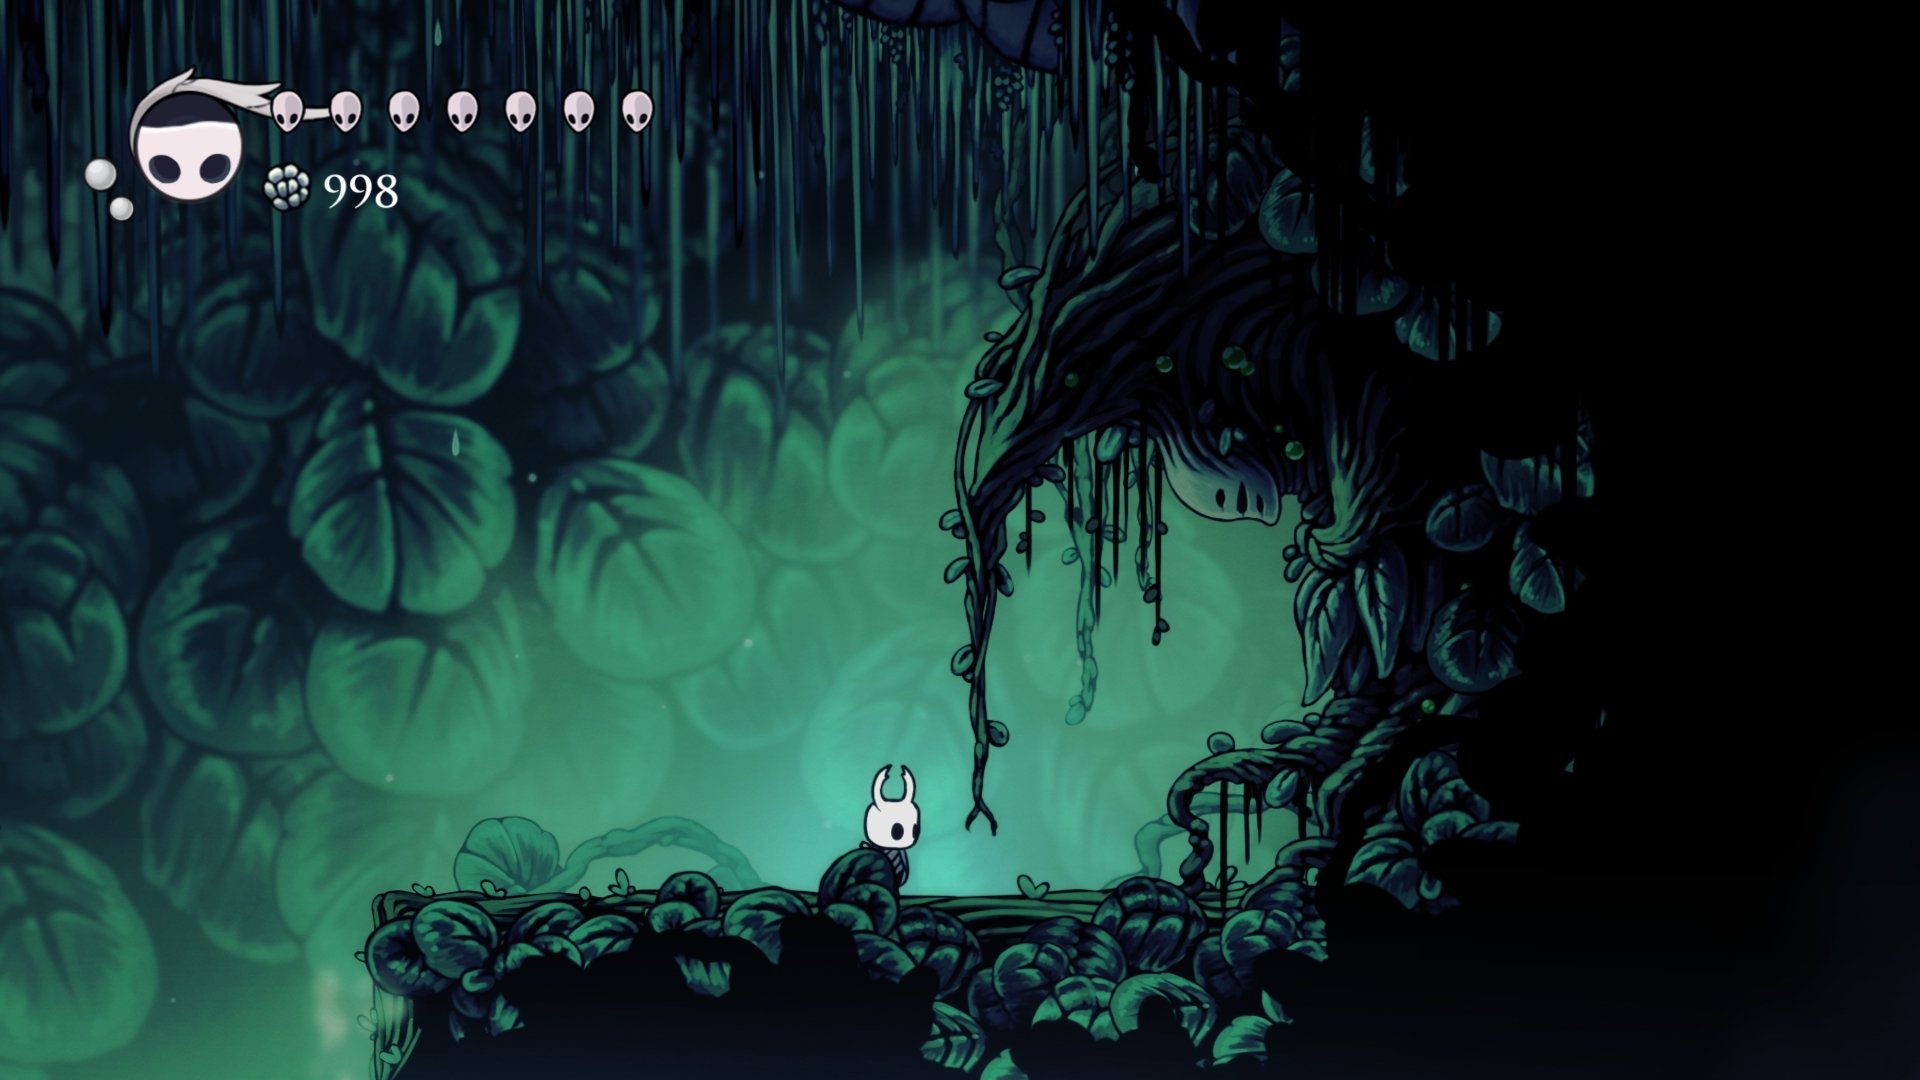 hollow knight download pc